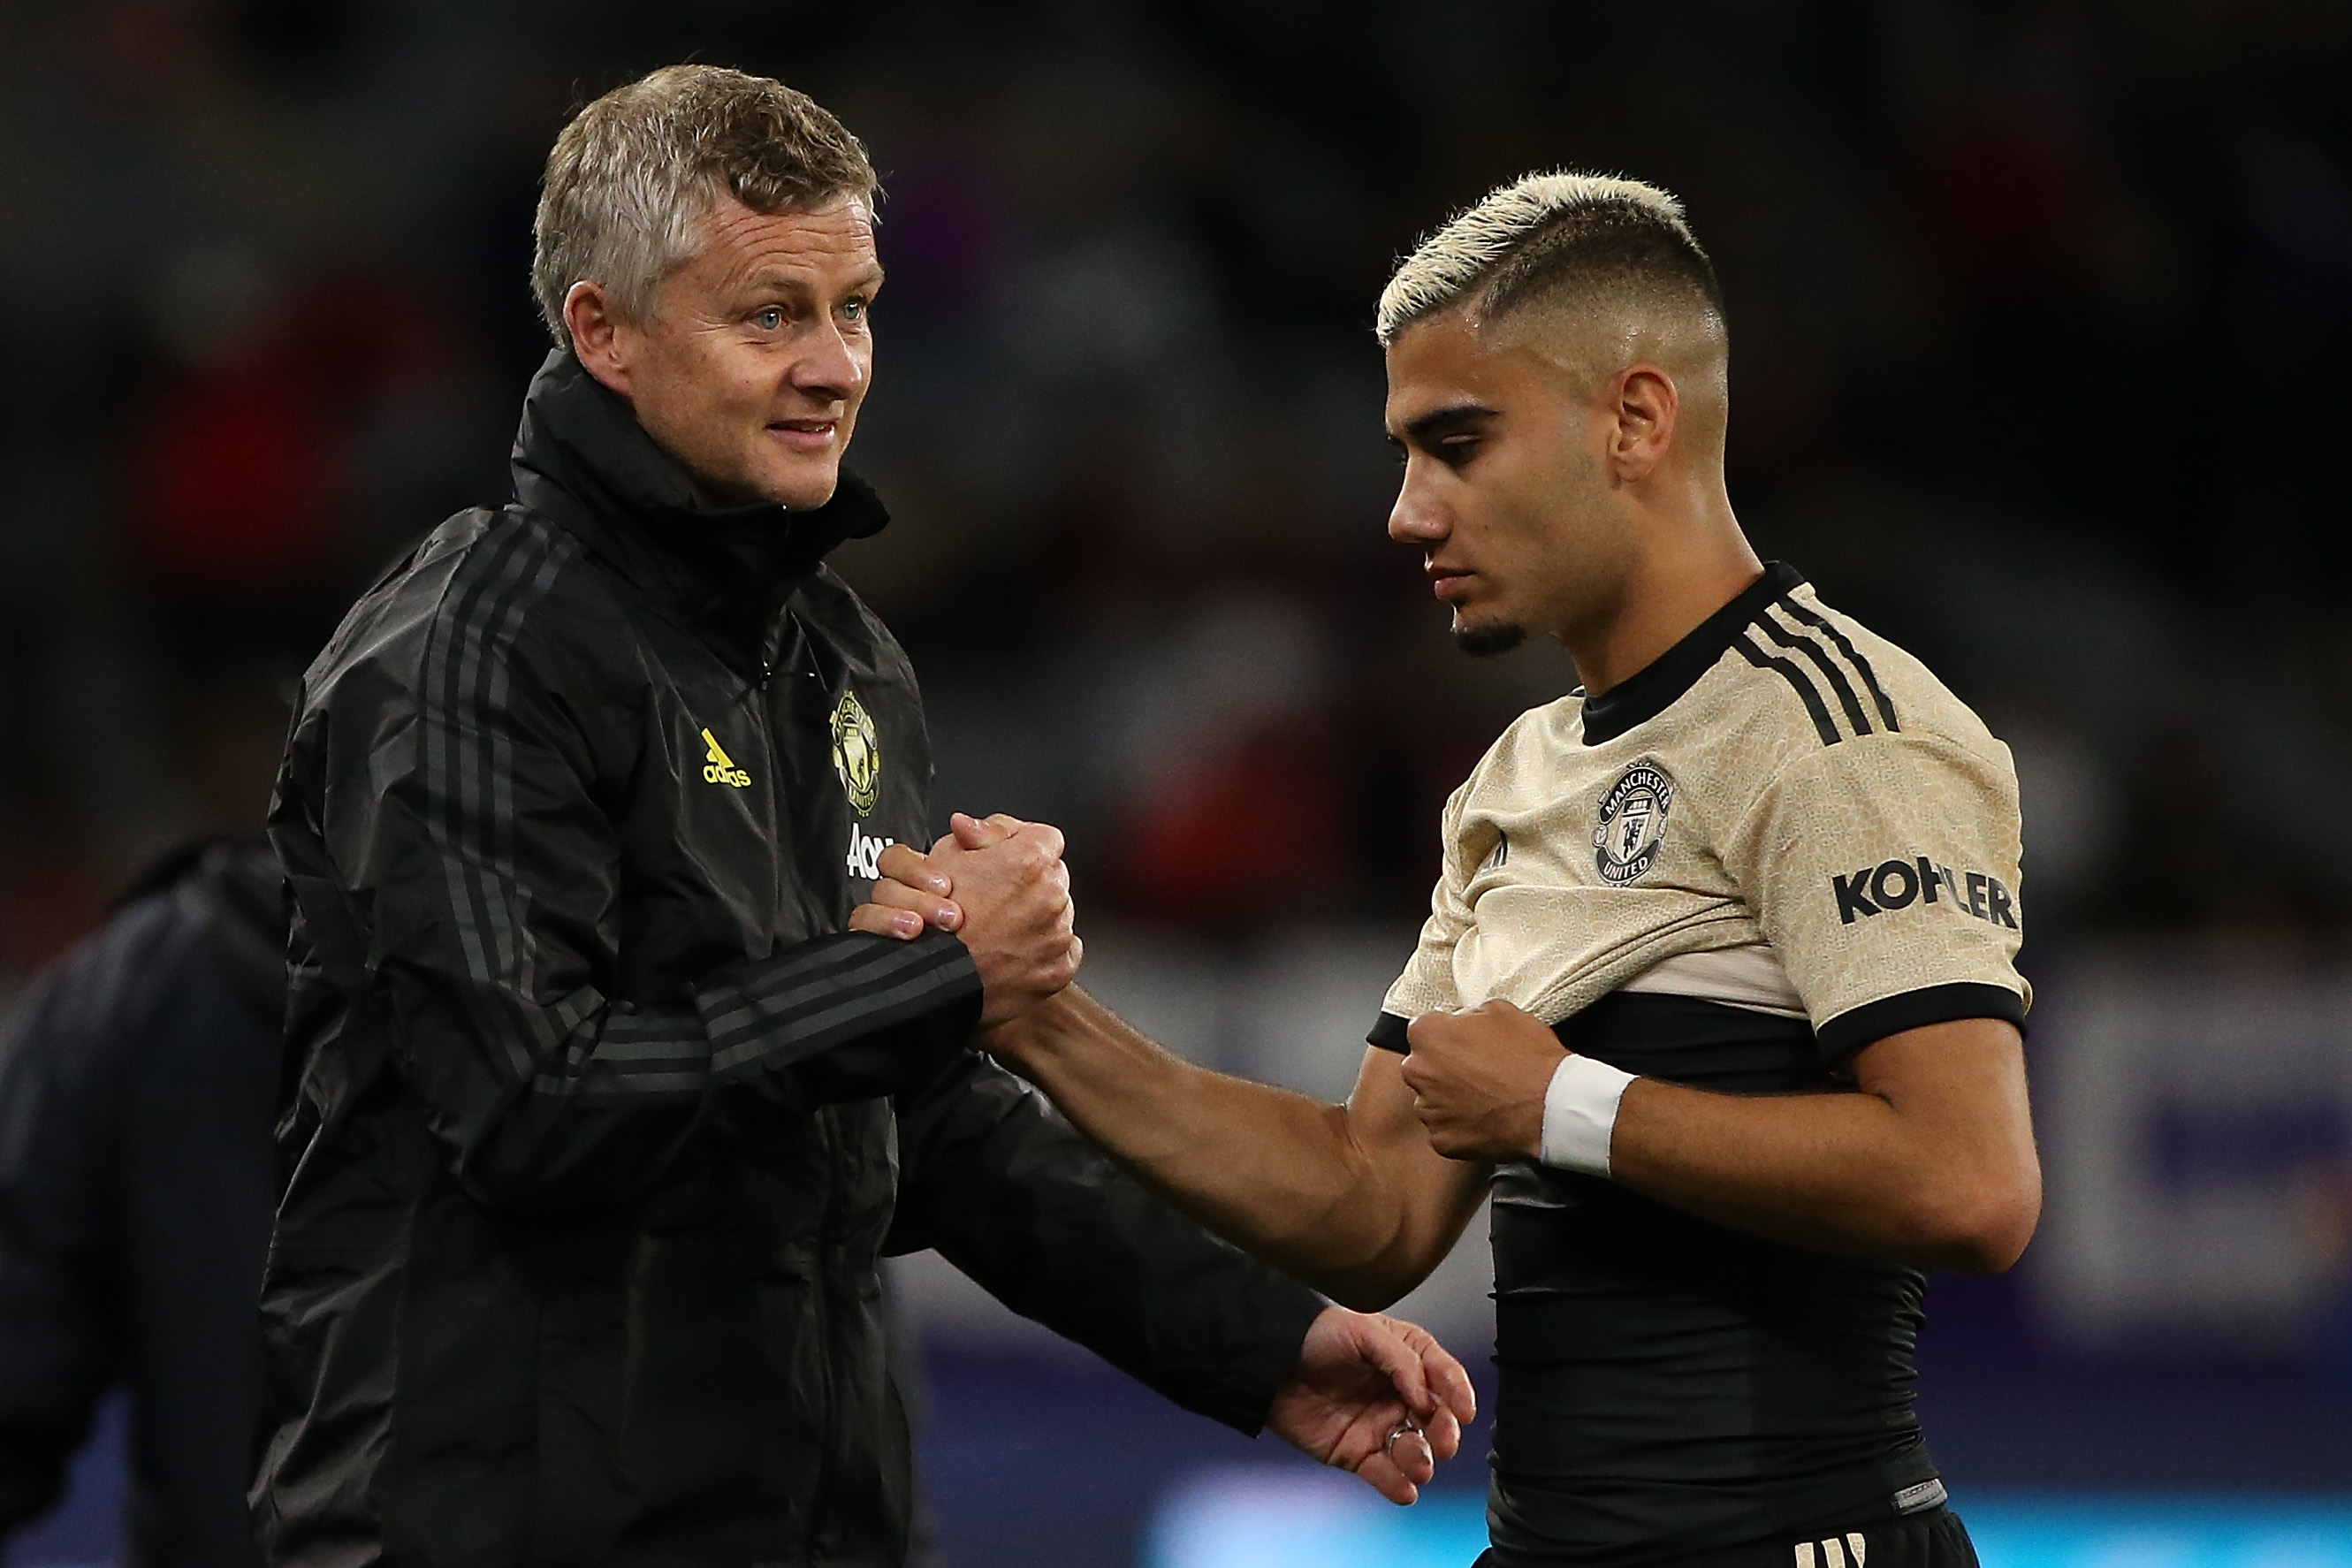 PERTH, AUSTRALIA - JULY 13: Ole Gunnar Solskjaer, manager of Manchester United acknowledges Andreas Pereira of Manchester United at half time during the match between the Perth Glory and Manchester United at Optus Stadium on July 13, 2019 in Perth, Australia. (Photo by Paul Kane/Getty Images)